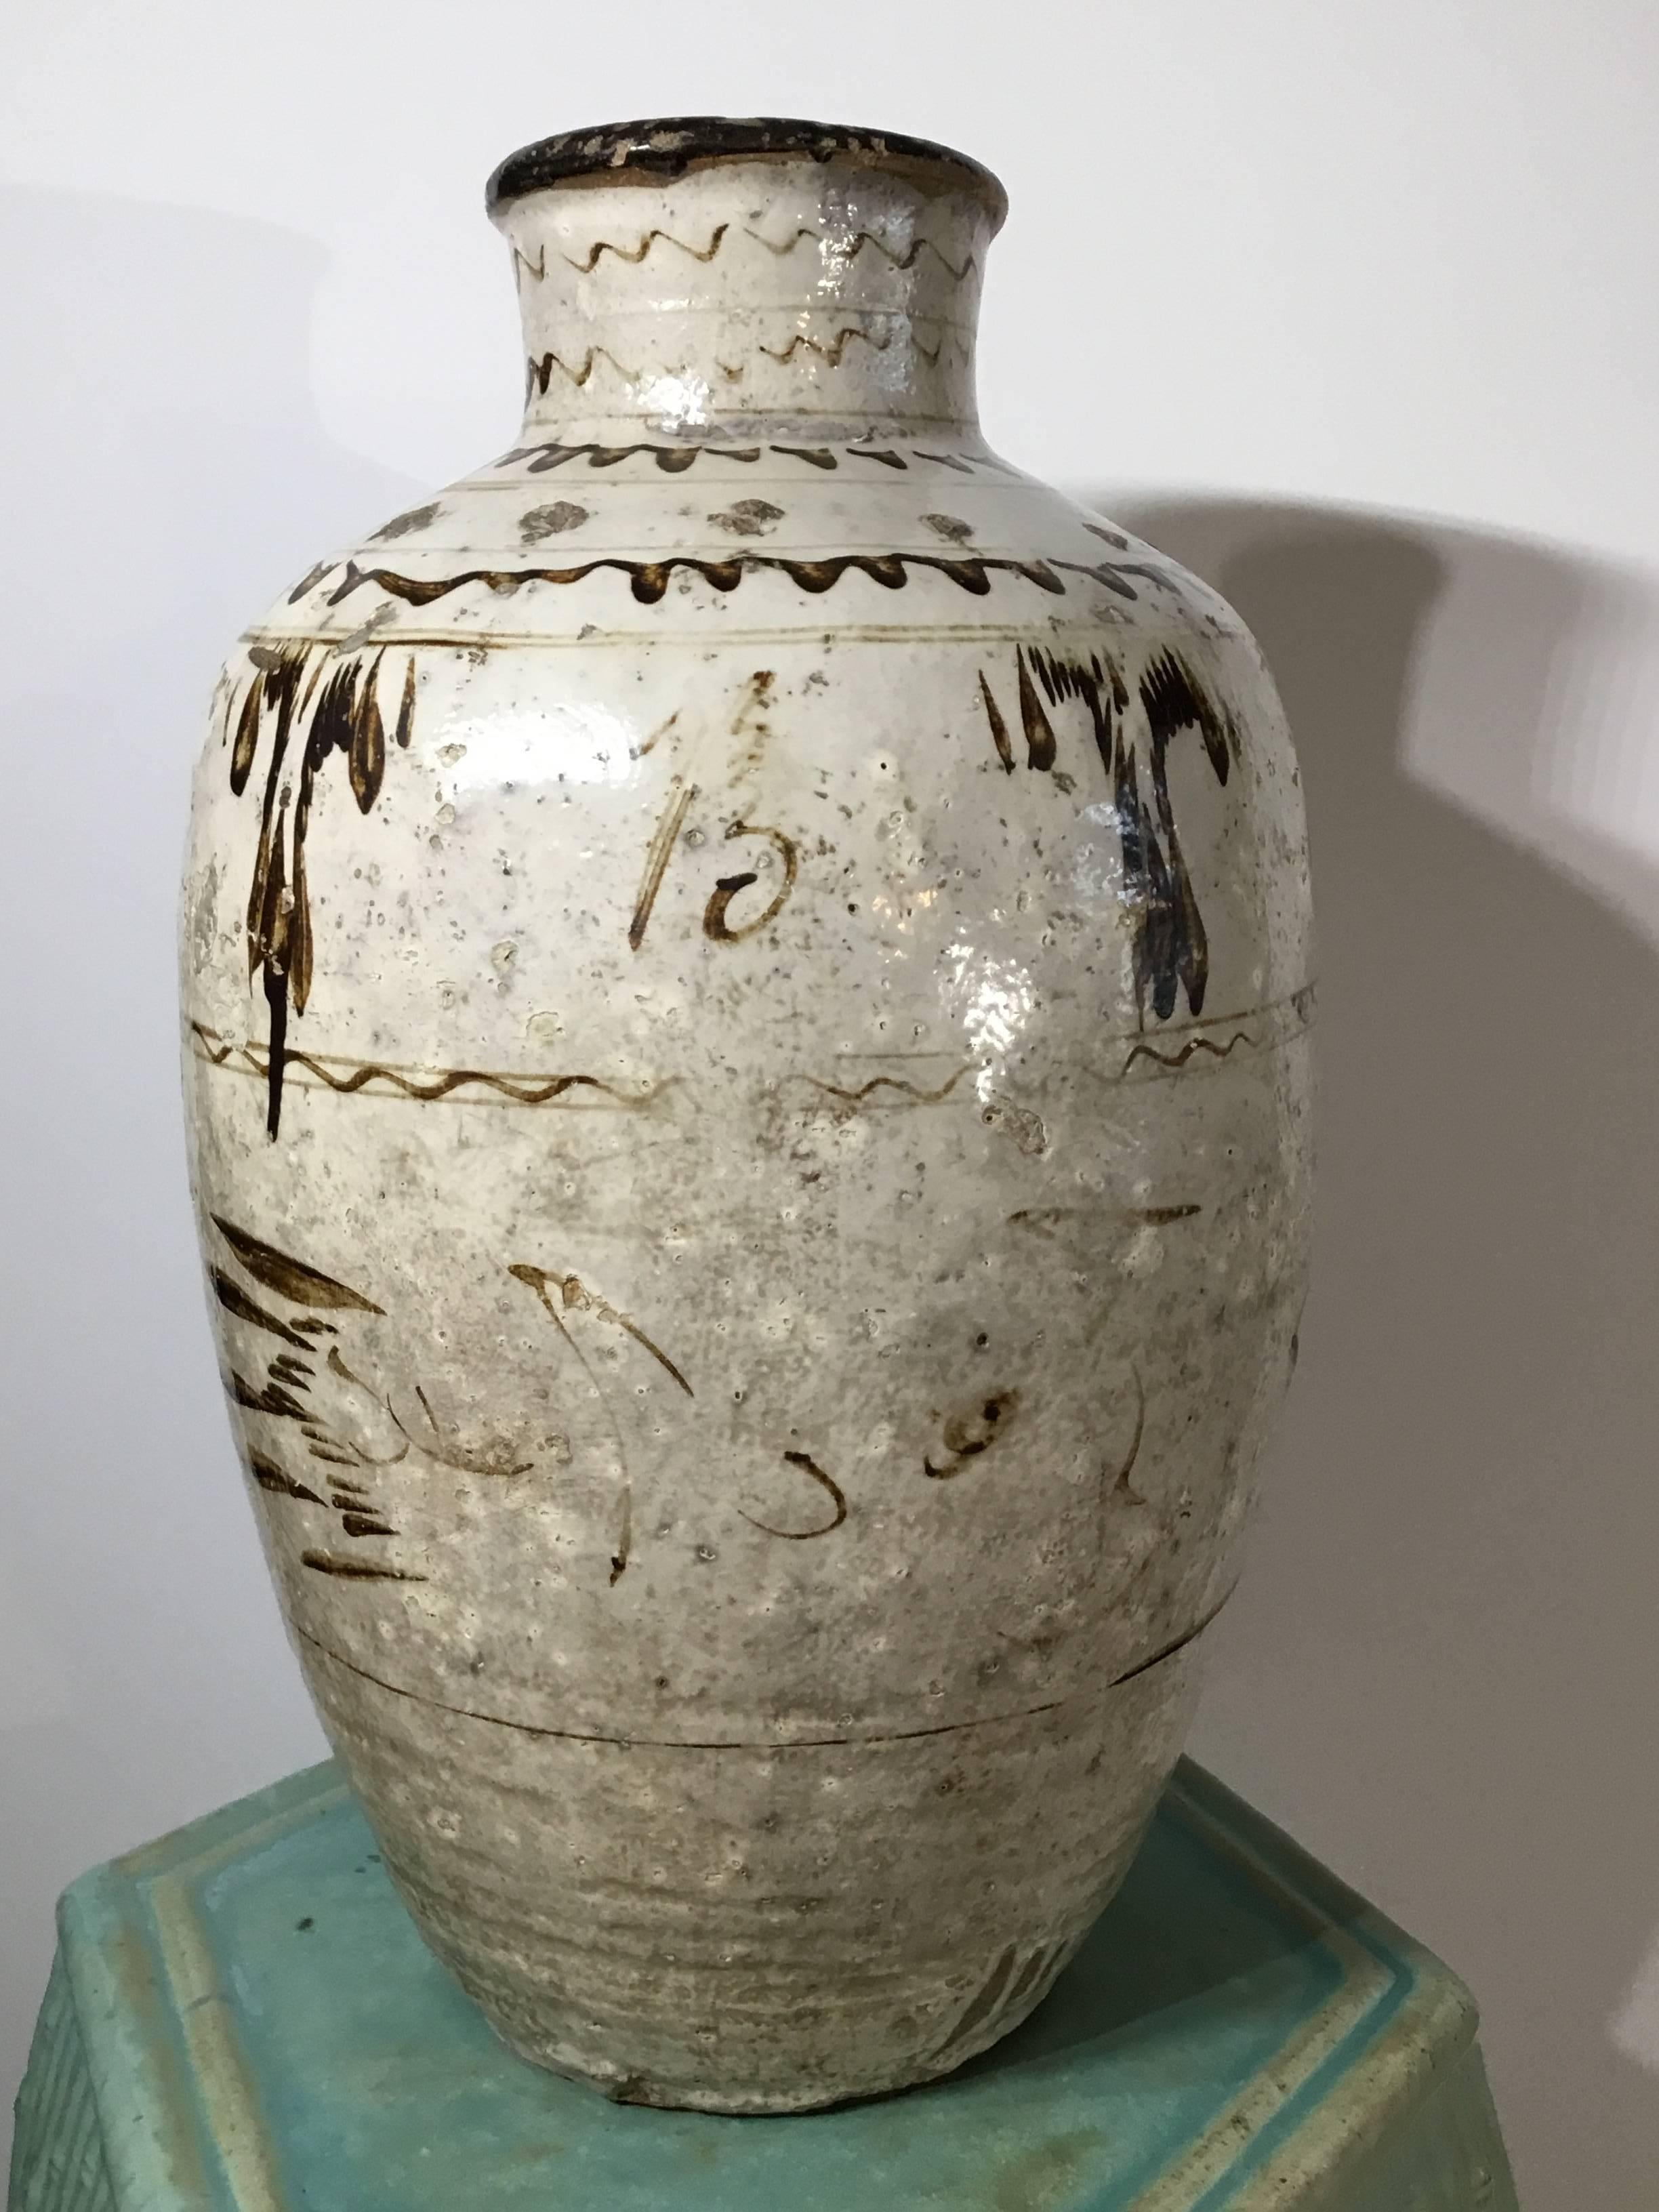 Beautiful stoneware Chinese vessel, hand-painted and glazed, decorated with Chinese motifs or calligraphy like to make exceptional object of art. Two more available.